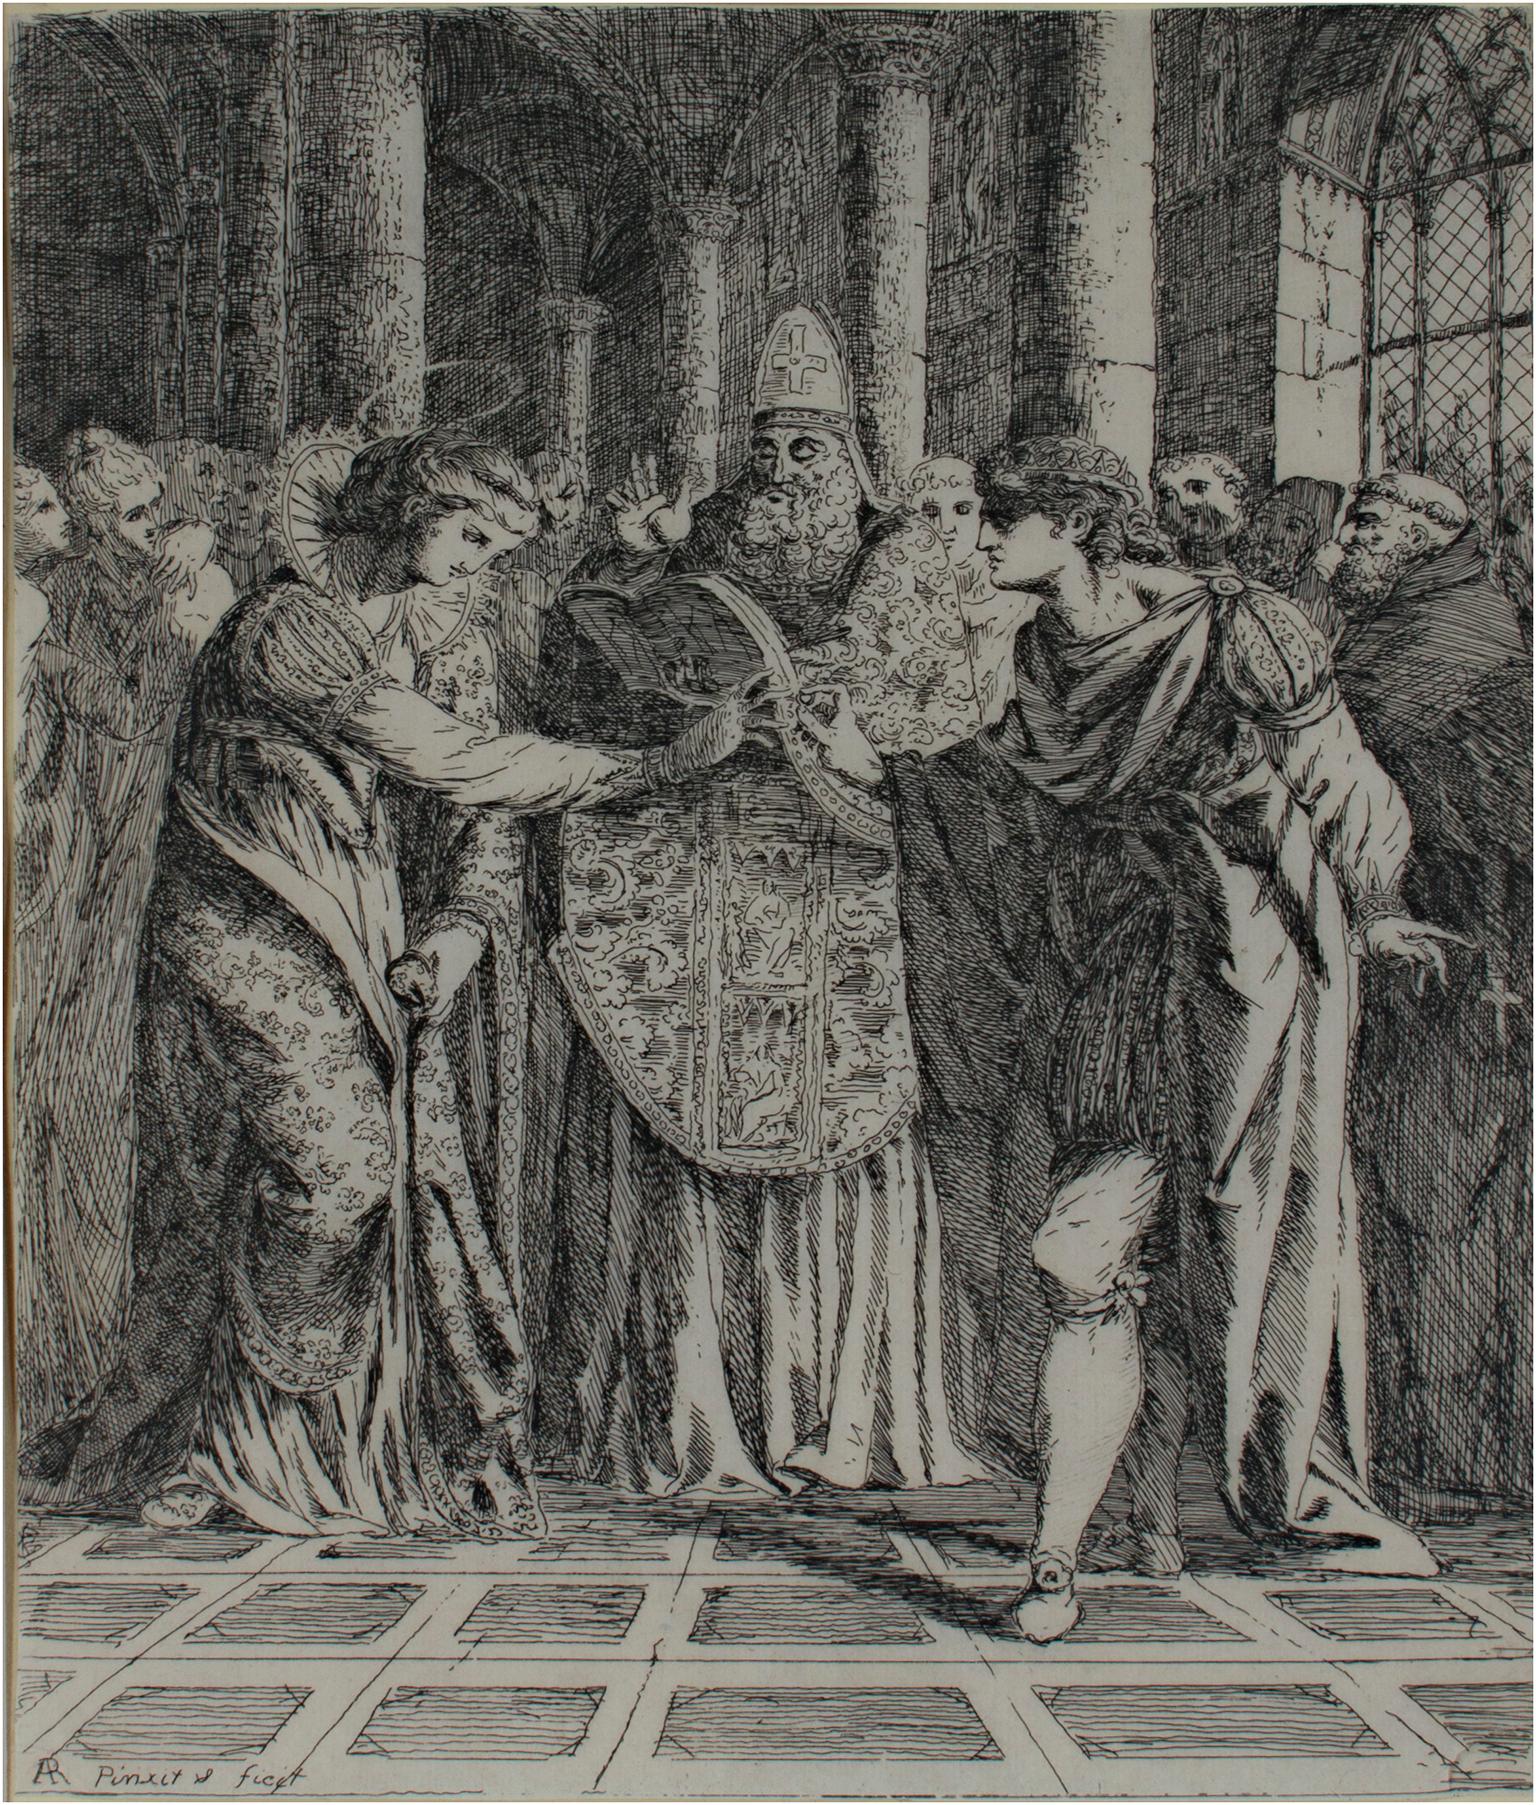 "Marriage of St. Margaret and King Malcolm, " Original Etching by A. Runciman